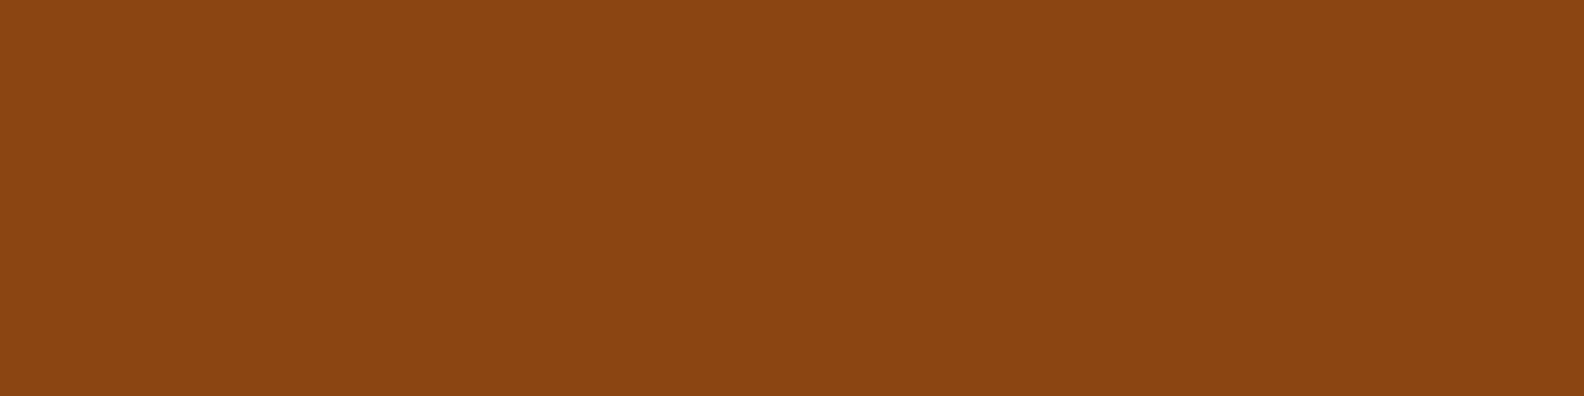 1584x396 Saddle Brown Solid Color Background